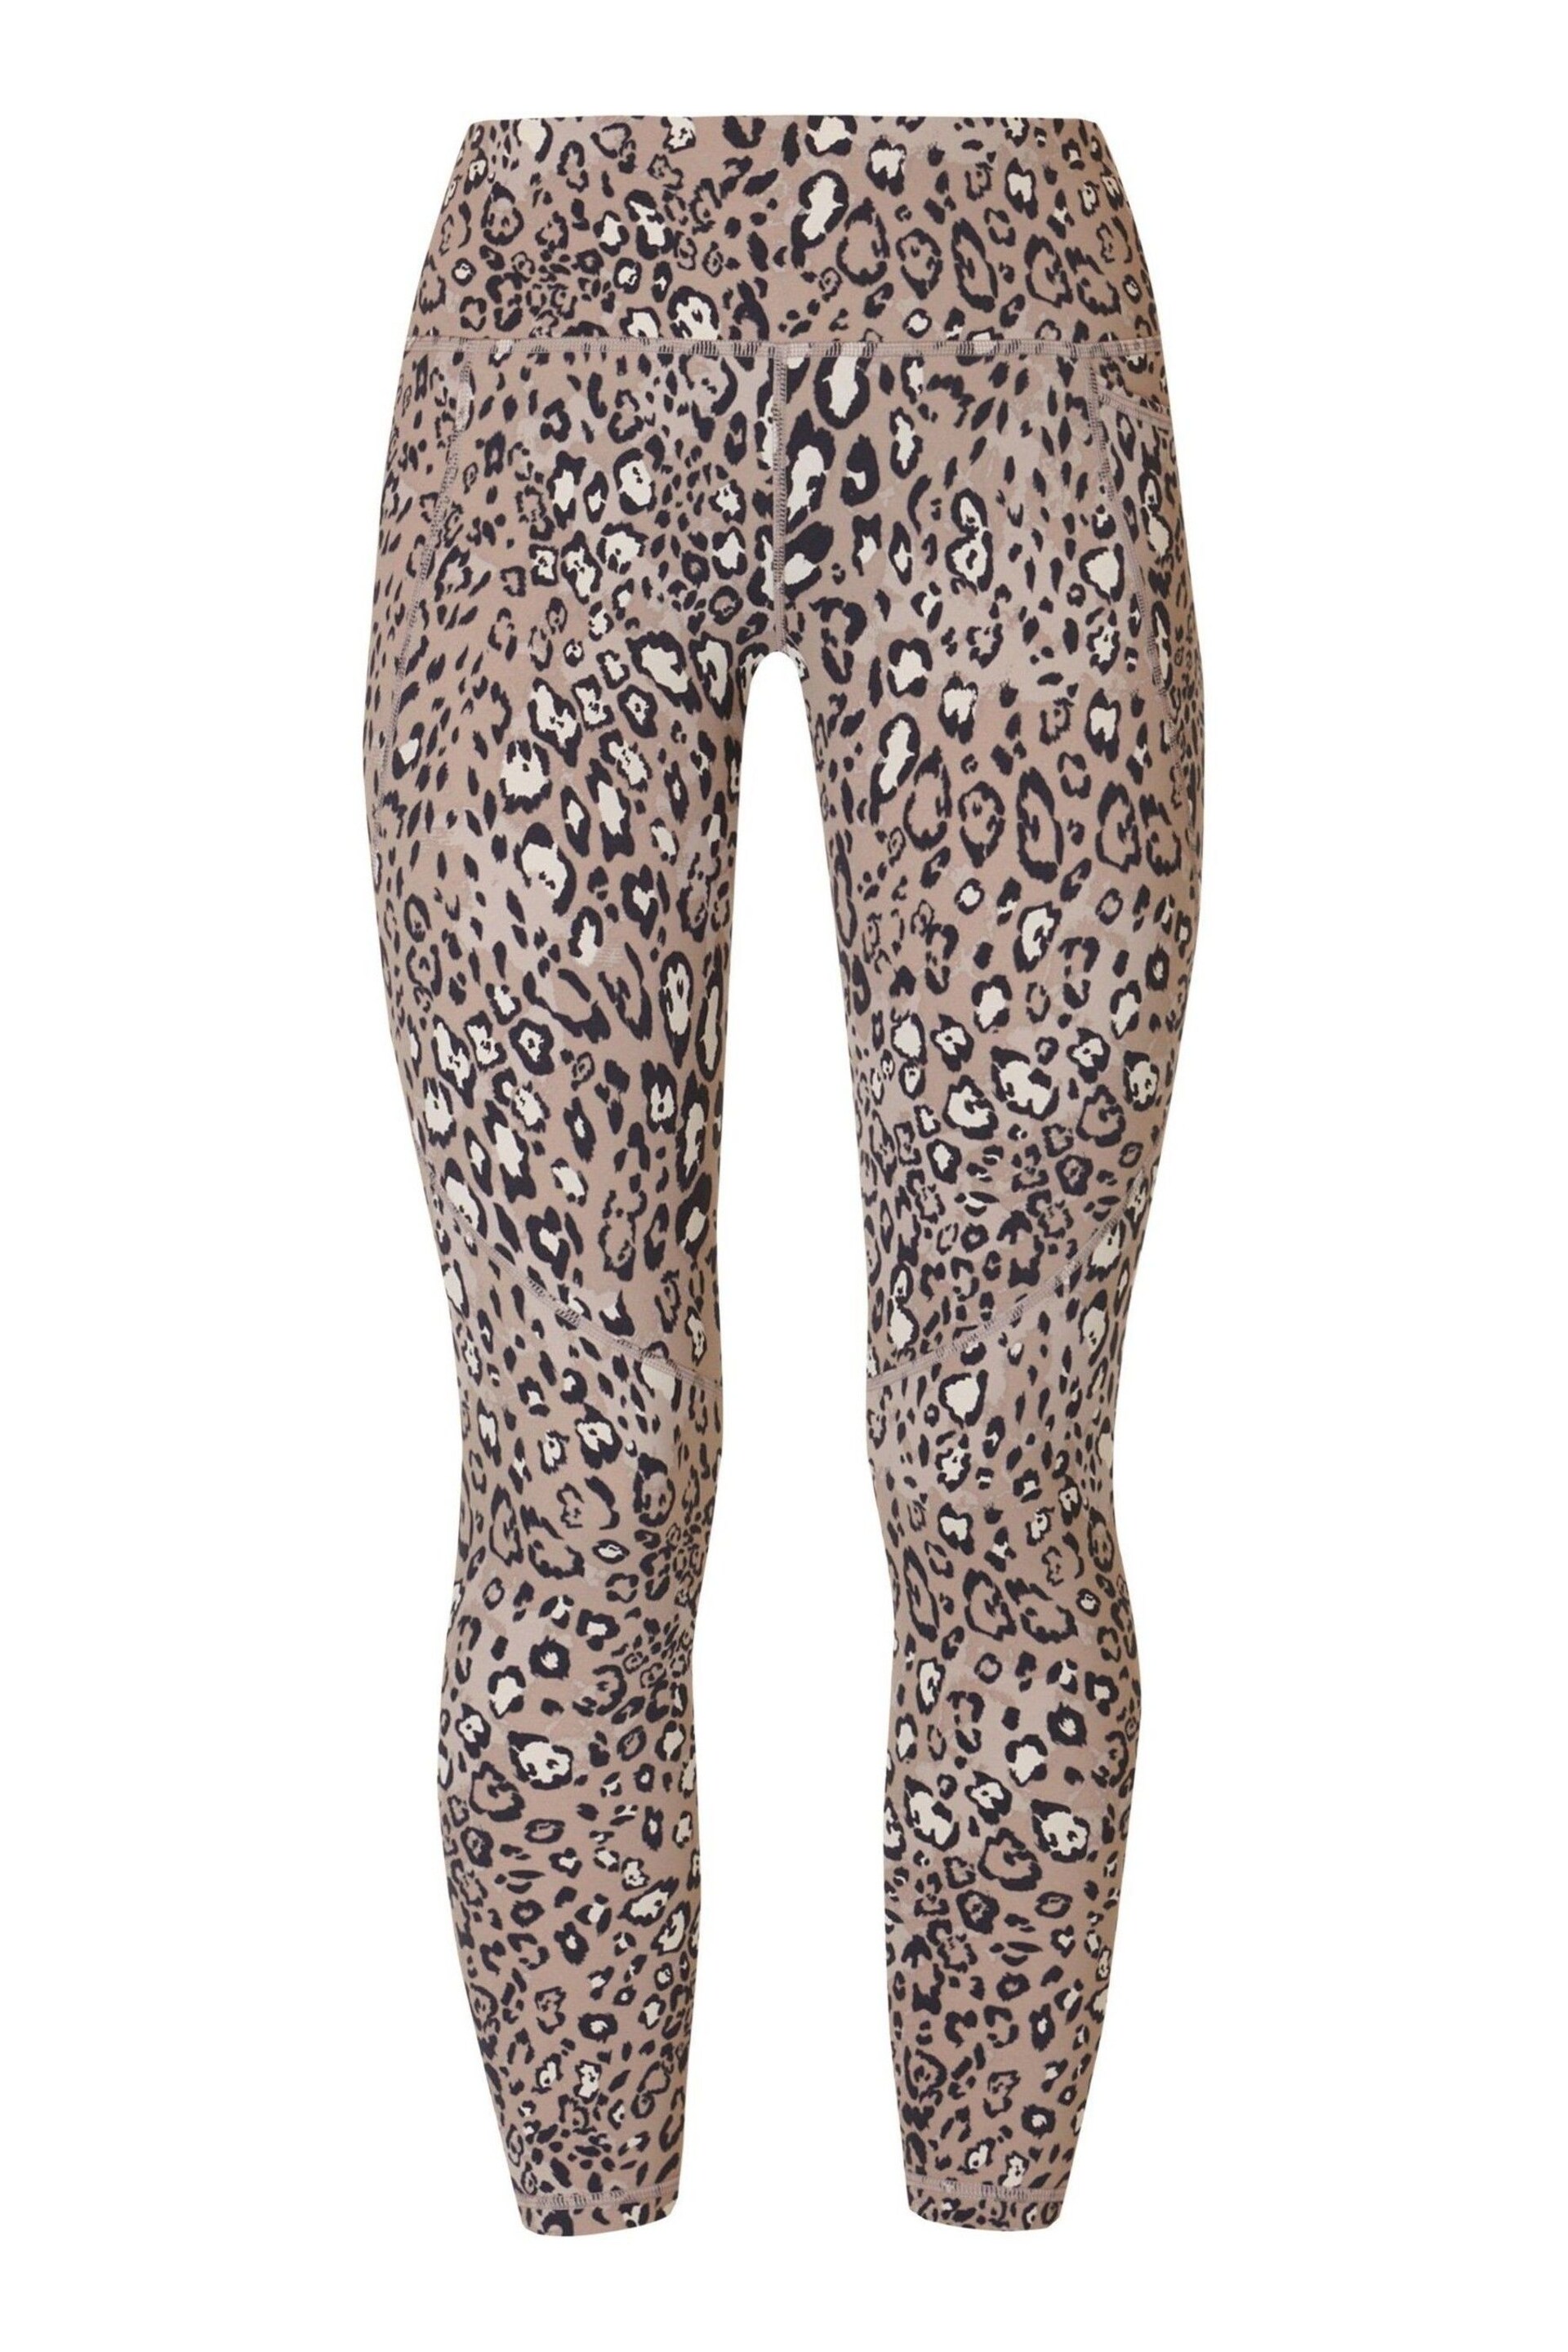 Sweaty Betty Brown Luxe Leopard Print Full Length Power Workout Leggings - Image 9 of 9